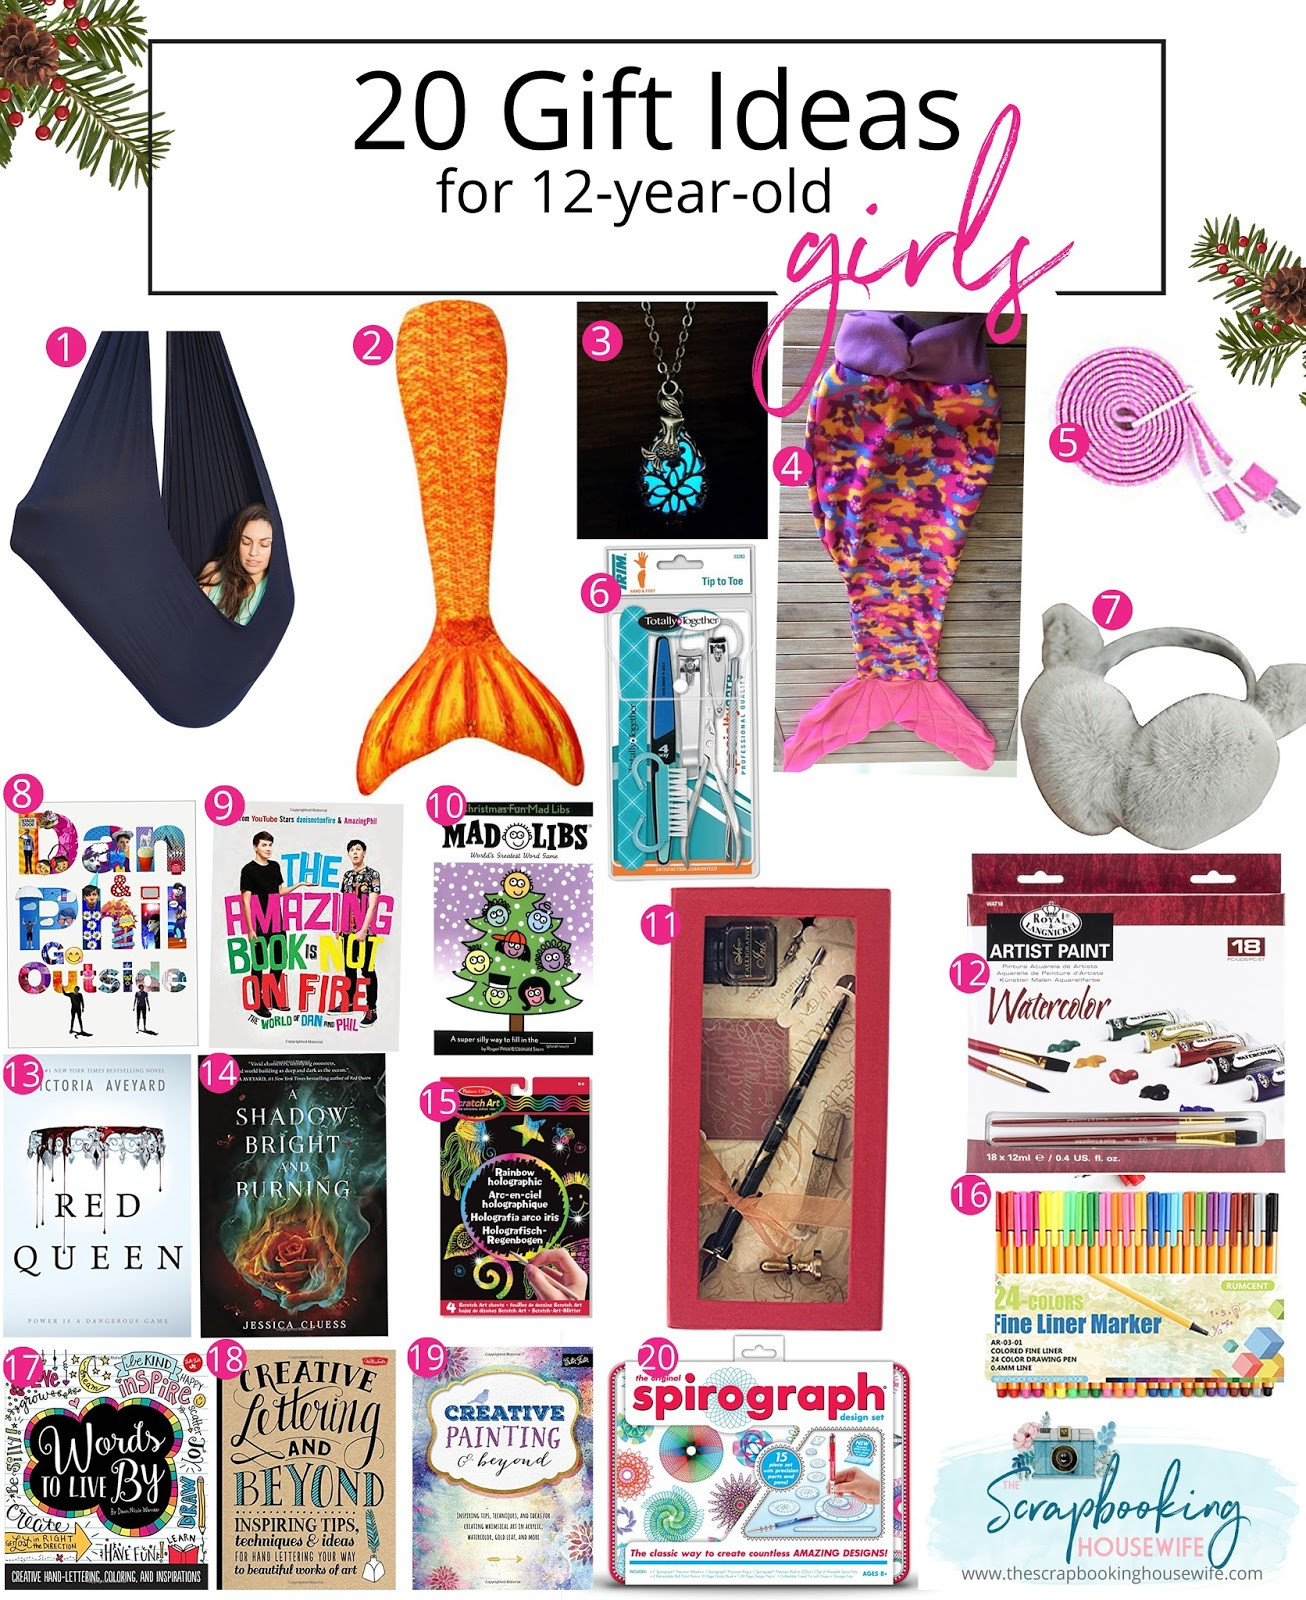 Birthday Gift Ideas For 20 Year Old Female
 Ellabella Designs 13 GIFT IDEAS FOR TODDLERS